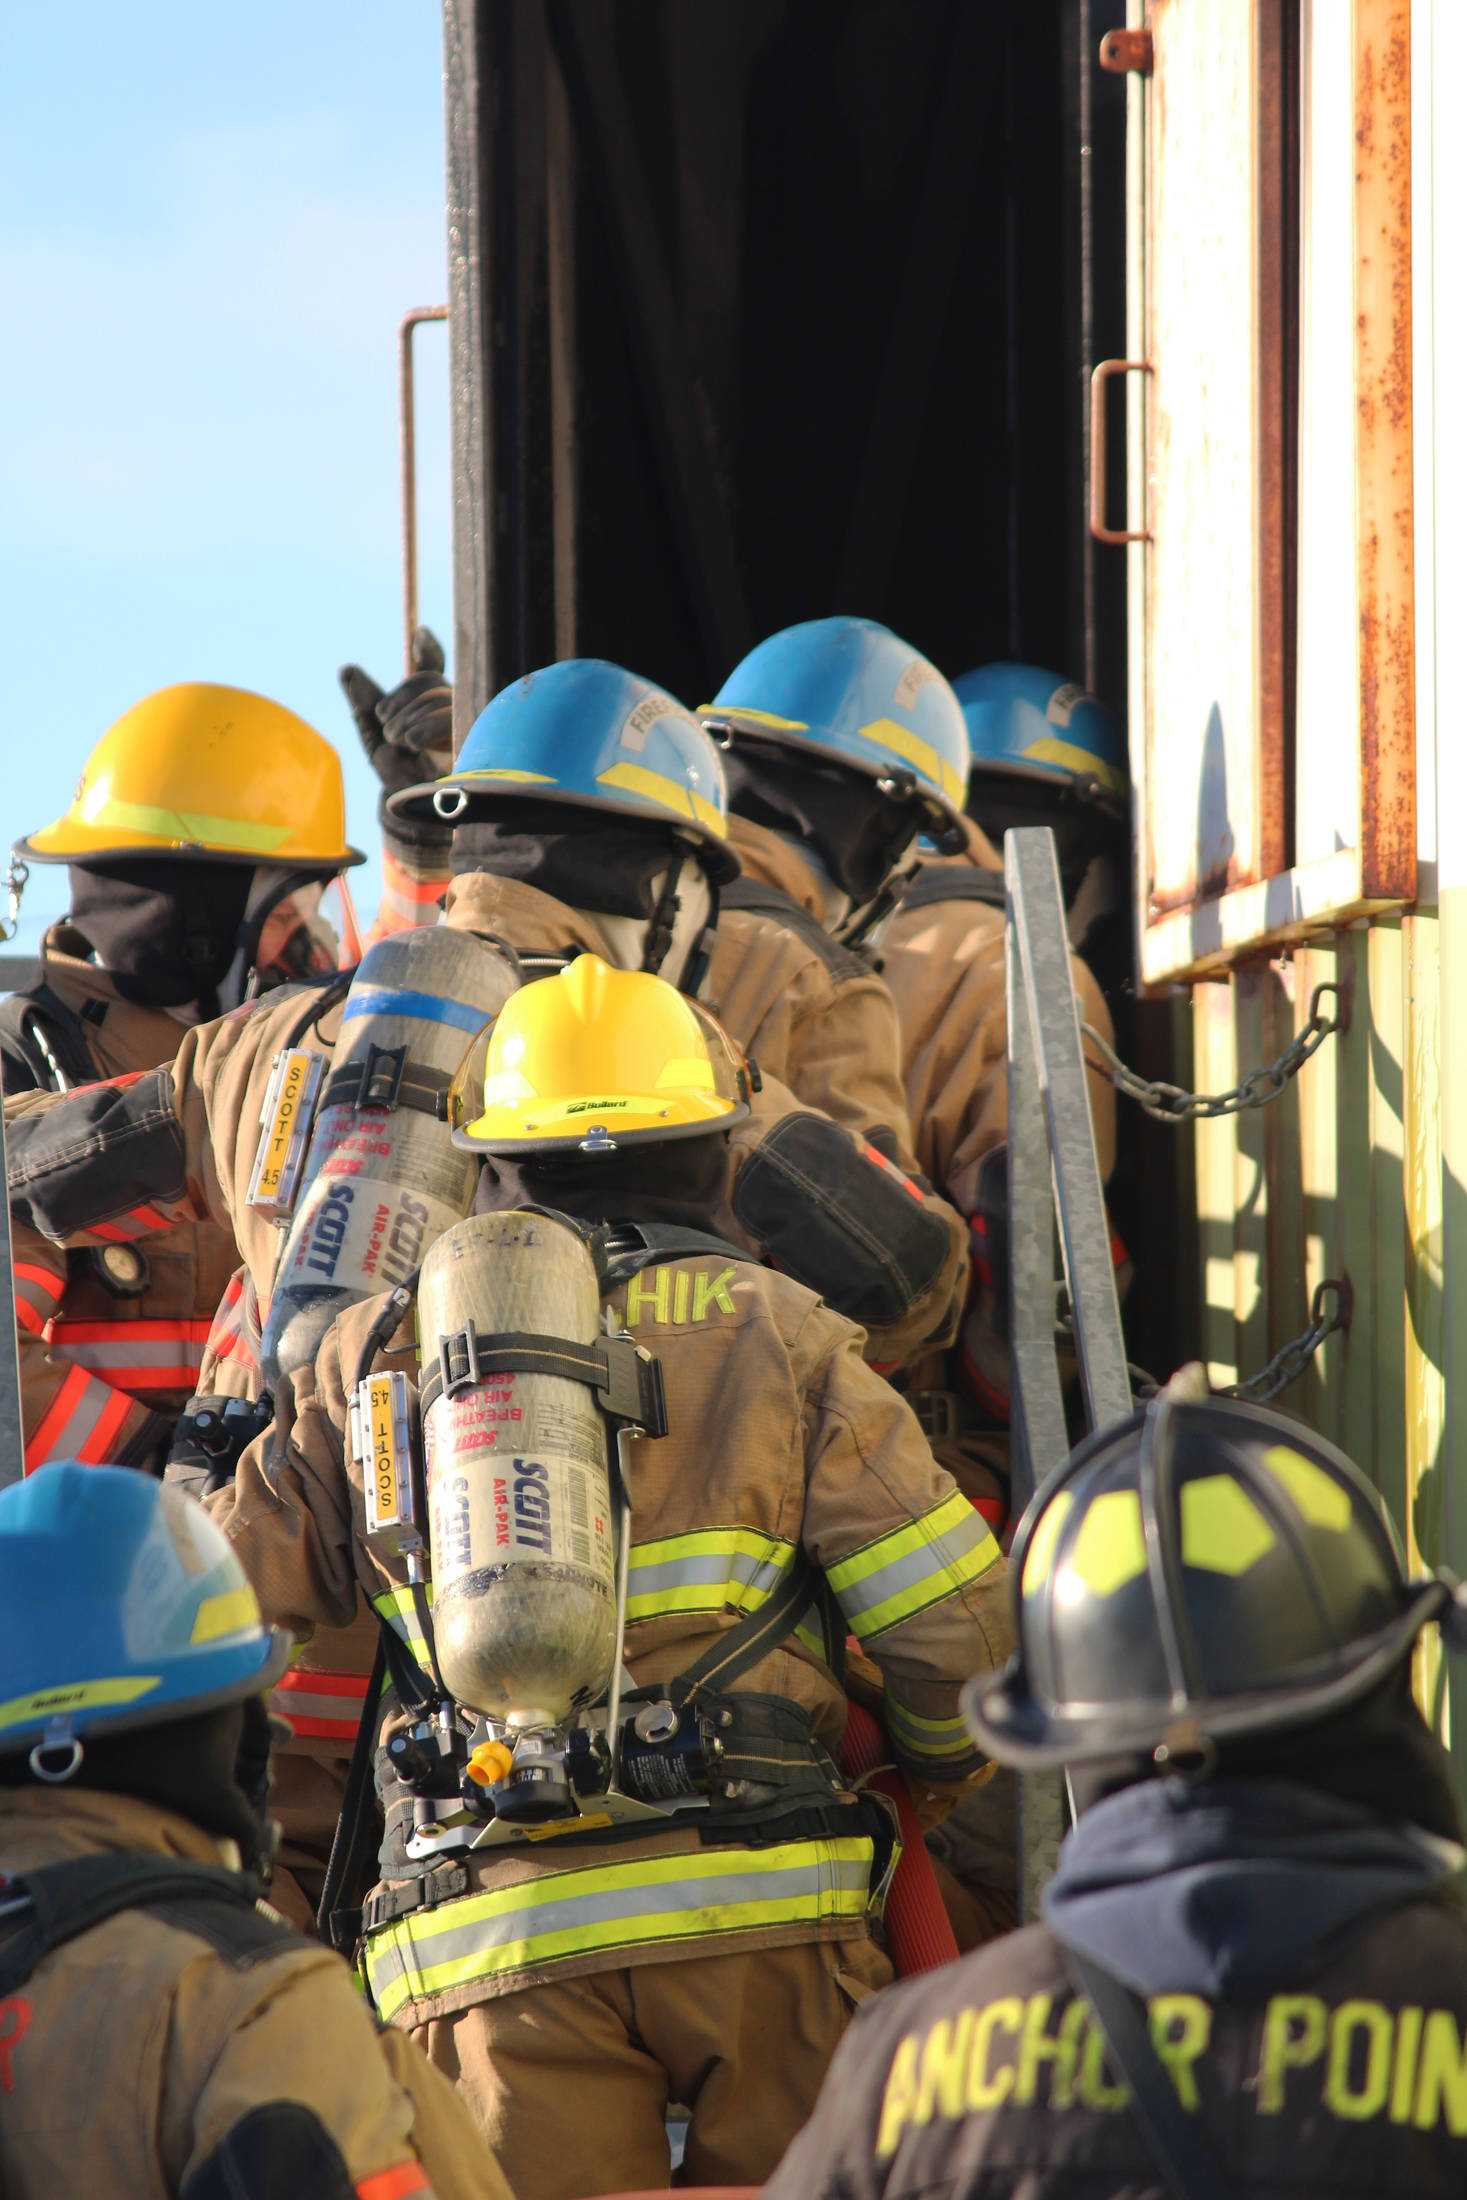 Firefighters from multiple agencies enter a structure with a fire burning inside it as part of a live fire exercise Saturday, Feb. 23, 2019 at the Homer Volunteer Fire Department’s fire training facility on Freight Dock Road in Homer, Alaska. Student volunteers rom Anchor Point Emergency Services, Homer Volunteer Fire Department, Ninilchik Emergency Services, and Central Emergency Services attended the drill as part of a joint Firefighter I class they are attending hosted by Anchor Point Fire and HVFD. (Photo by Megan Pacer/Homer News)